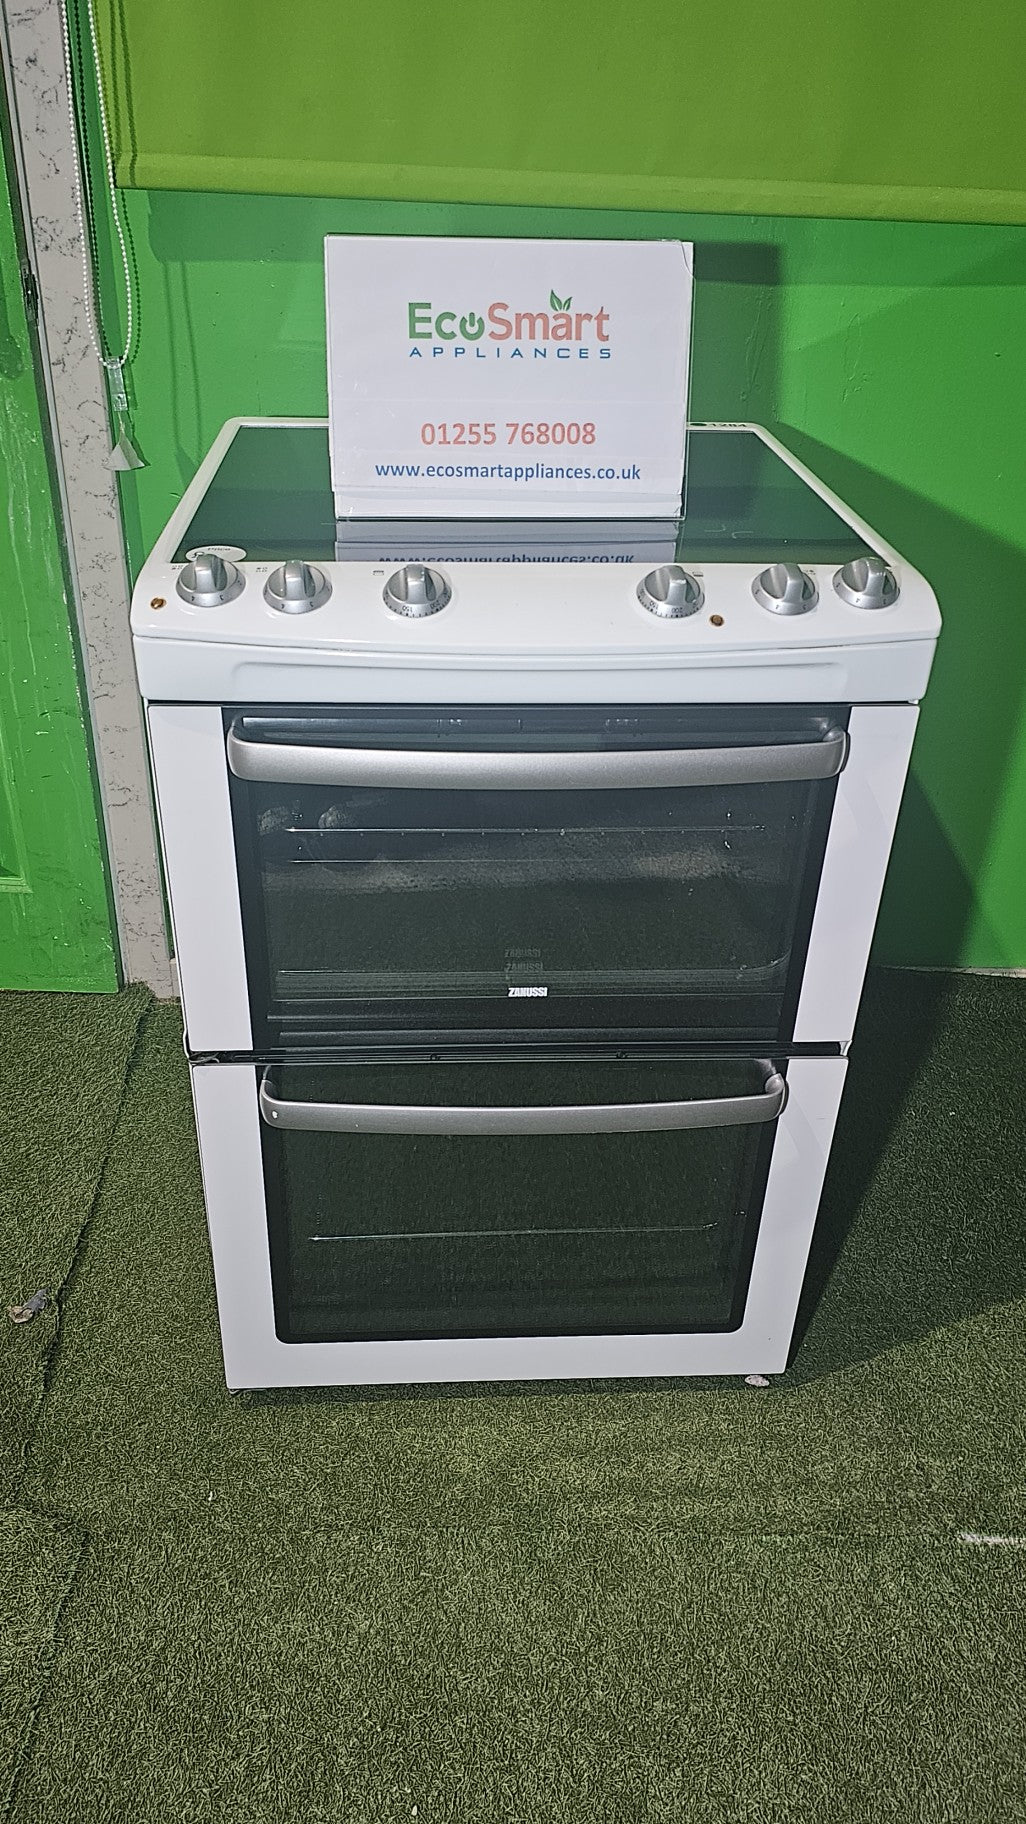 EcoSmart Appliances - Zanussi 60cm Electric Cooker with Double Oven (1284)